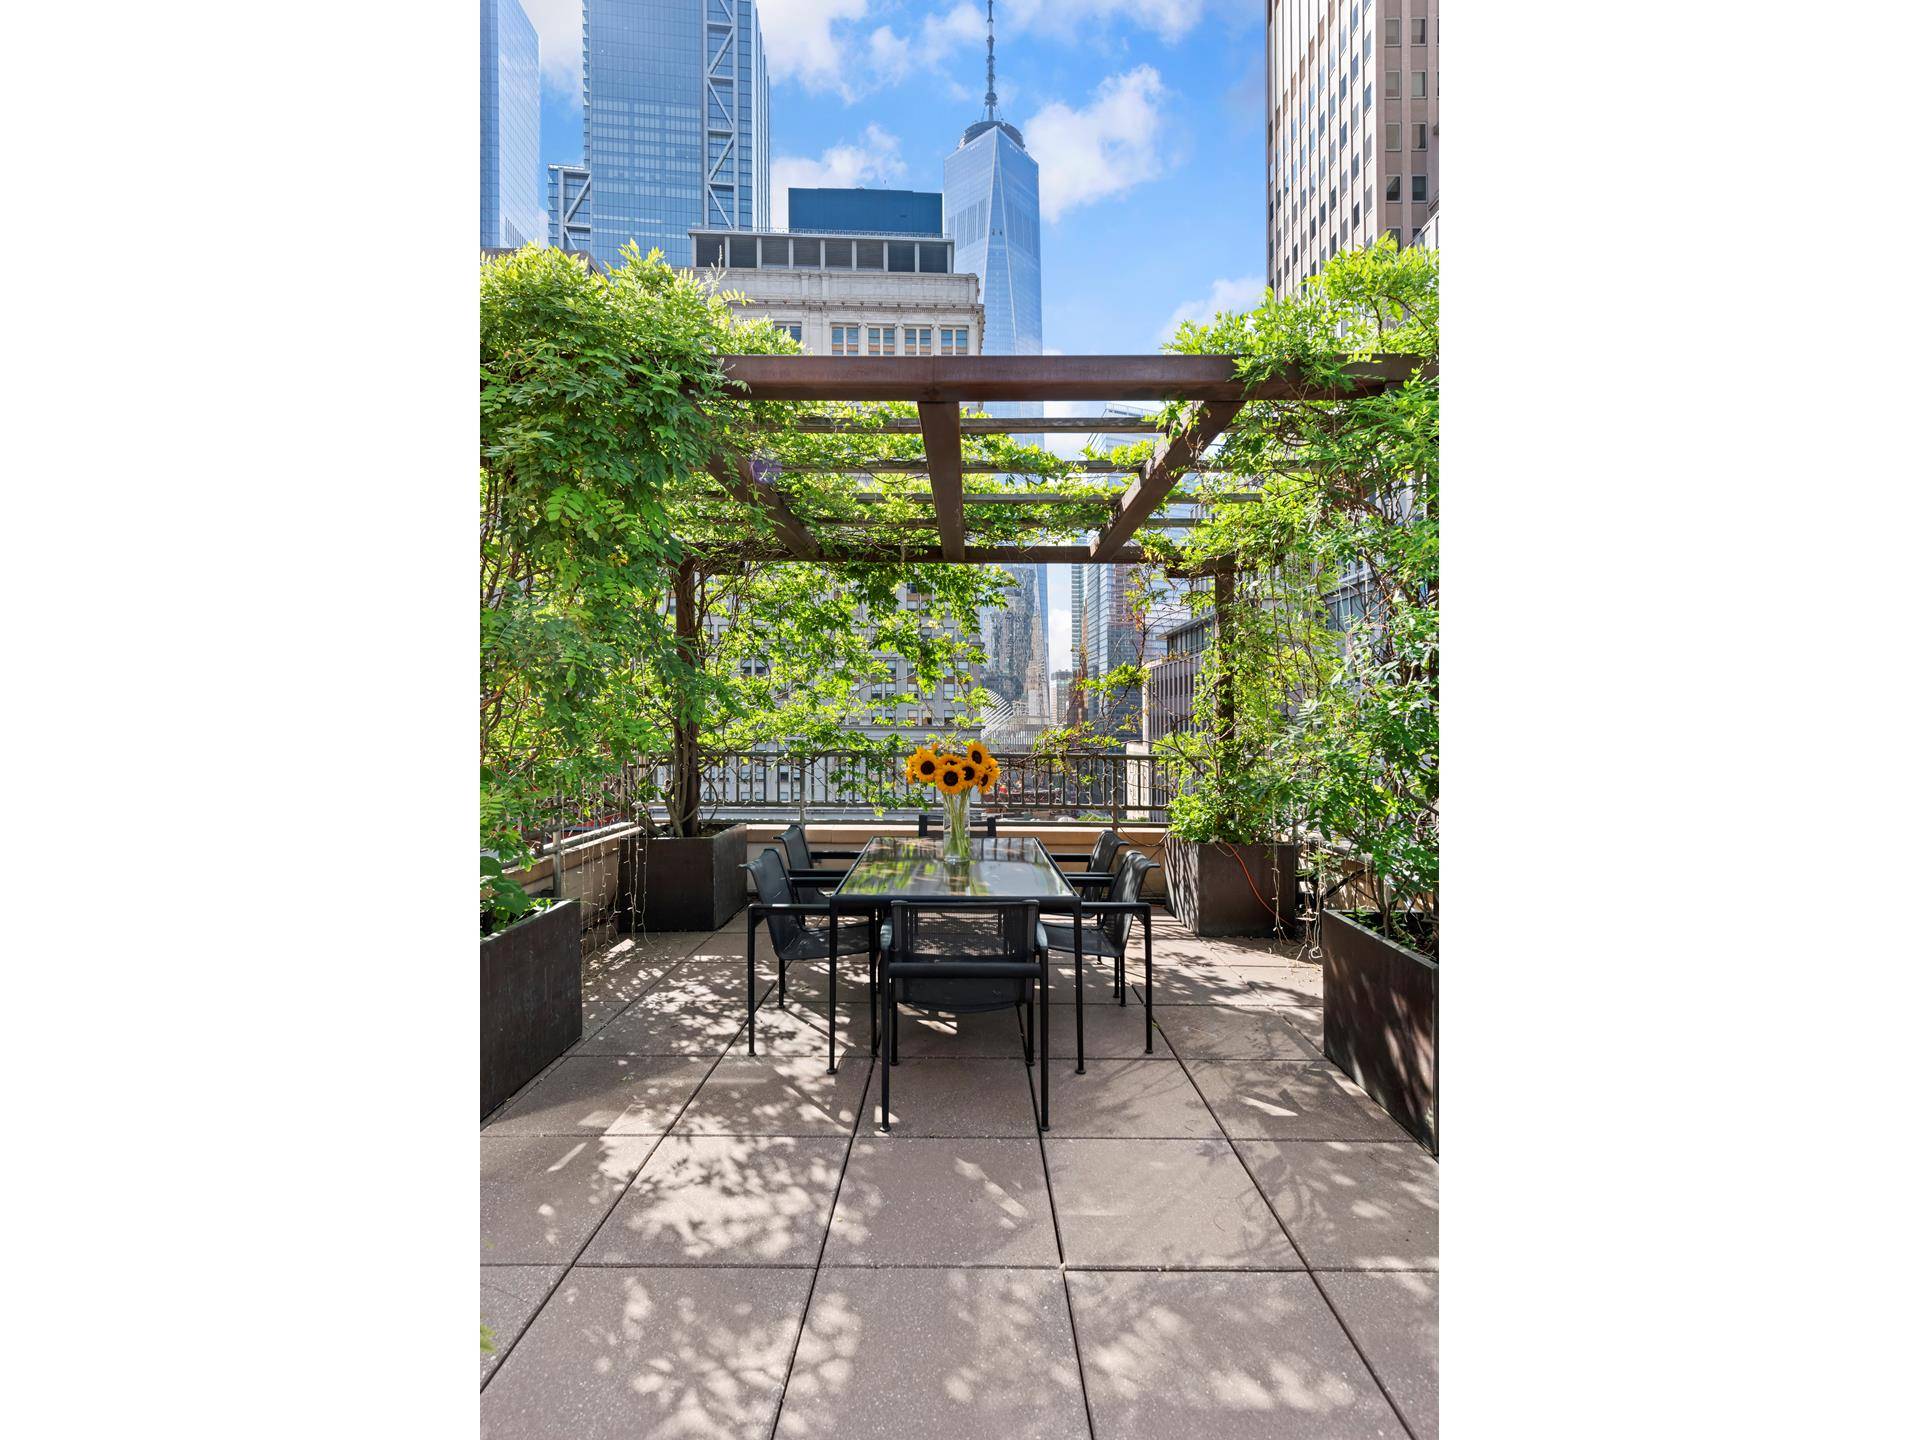 Two bedroom penthouse with a 950 square foot planted terrace located in the heart of FiDi.